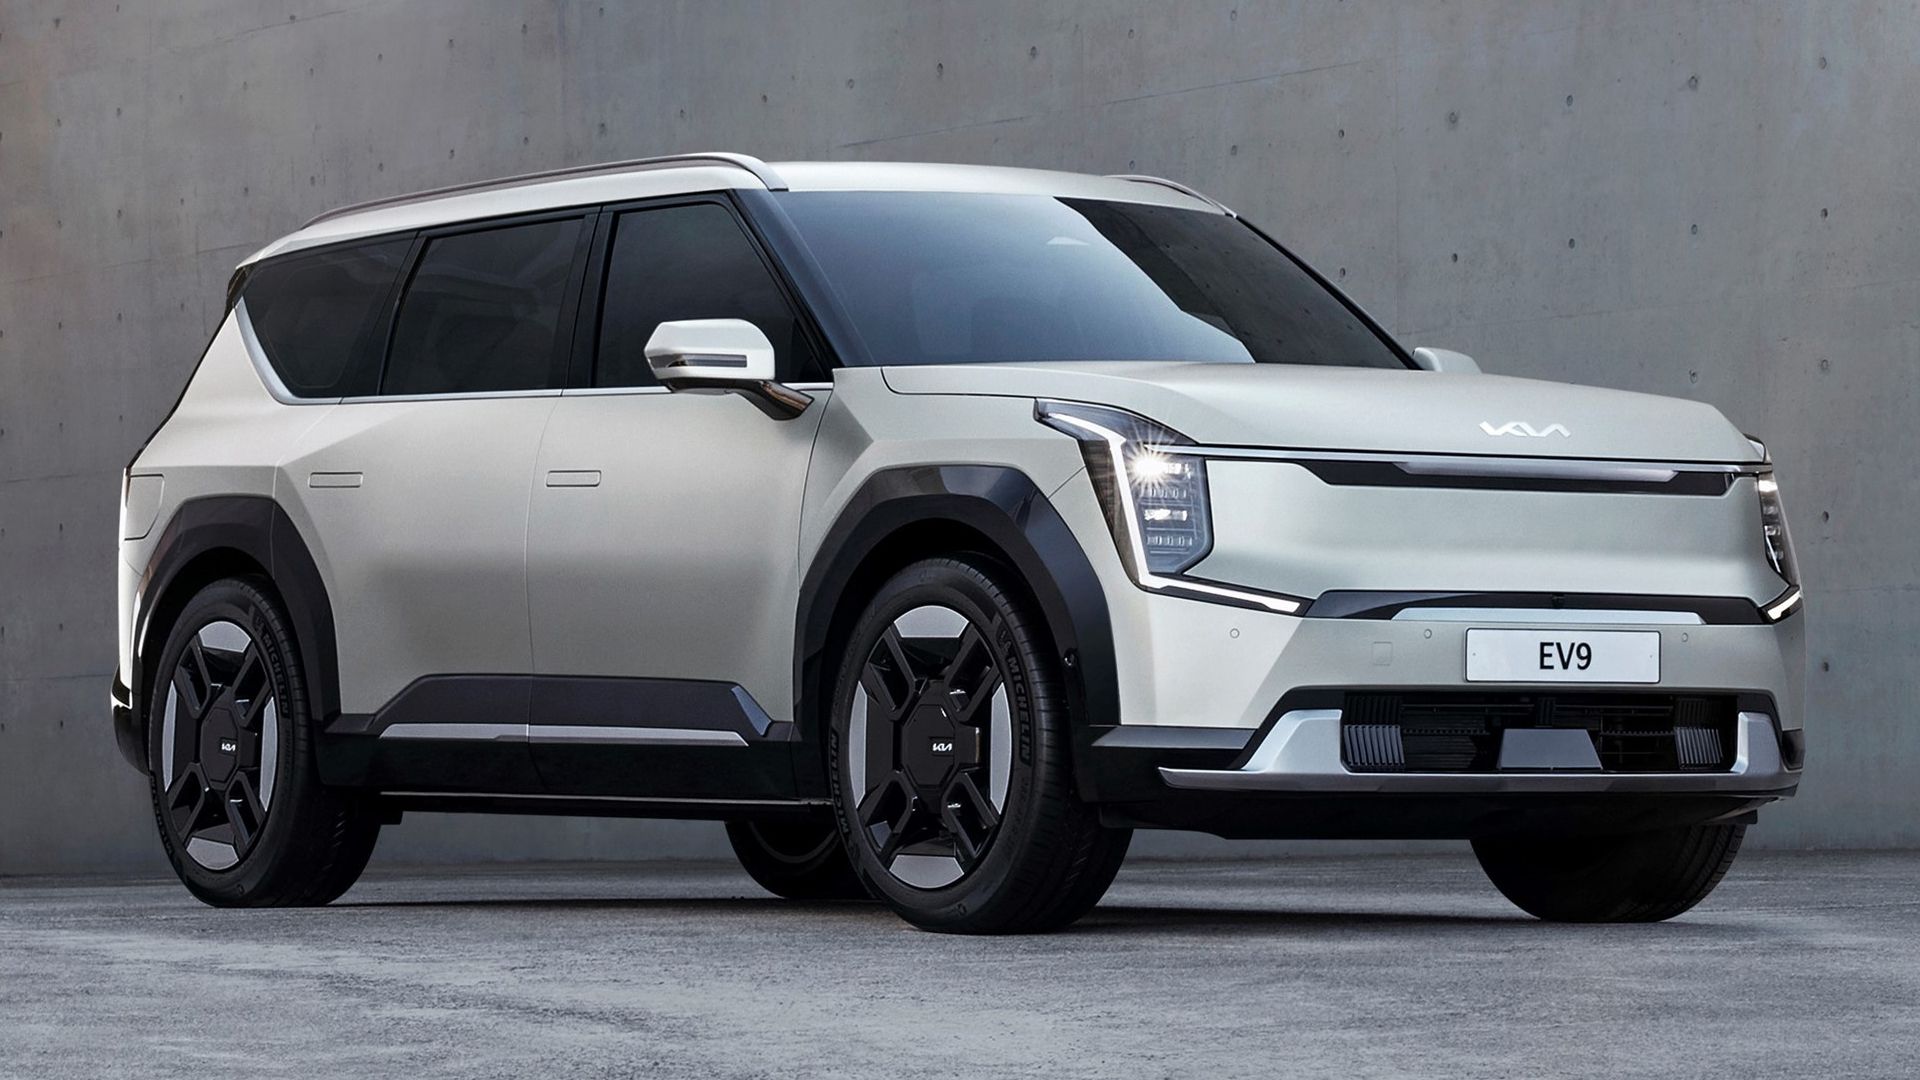 10 Reasons Why The New Kia EV9 Is A Solid Alternative To The Tesla Model X